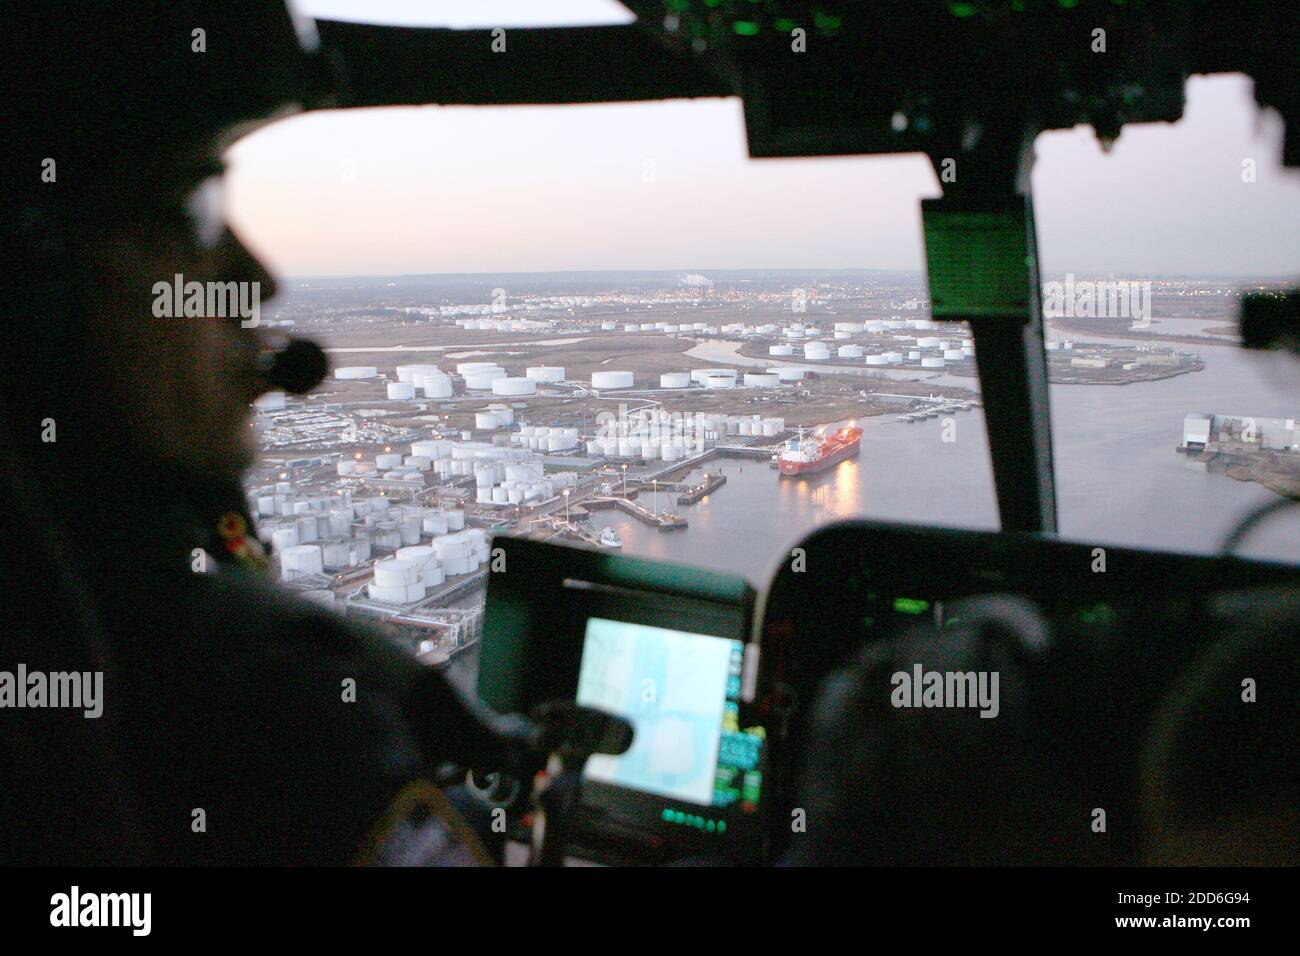 NO FILM, NO VIDEO, NO TV, NO DOCUMENTARY - Pilot David Roman, right, and co-pilot Michael Sileo of the New York City Police Department's Aviation Unit patrol over the city on Tuesday, November 21, 2006. Photo by Charles Eckert/MCT/ABACAPRESS.COM Stock Photo